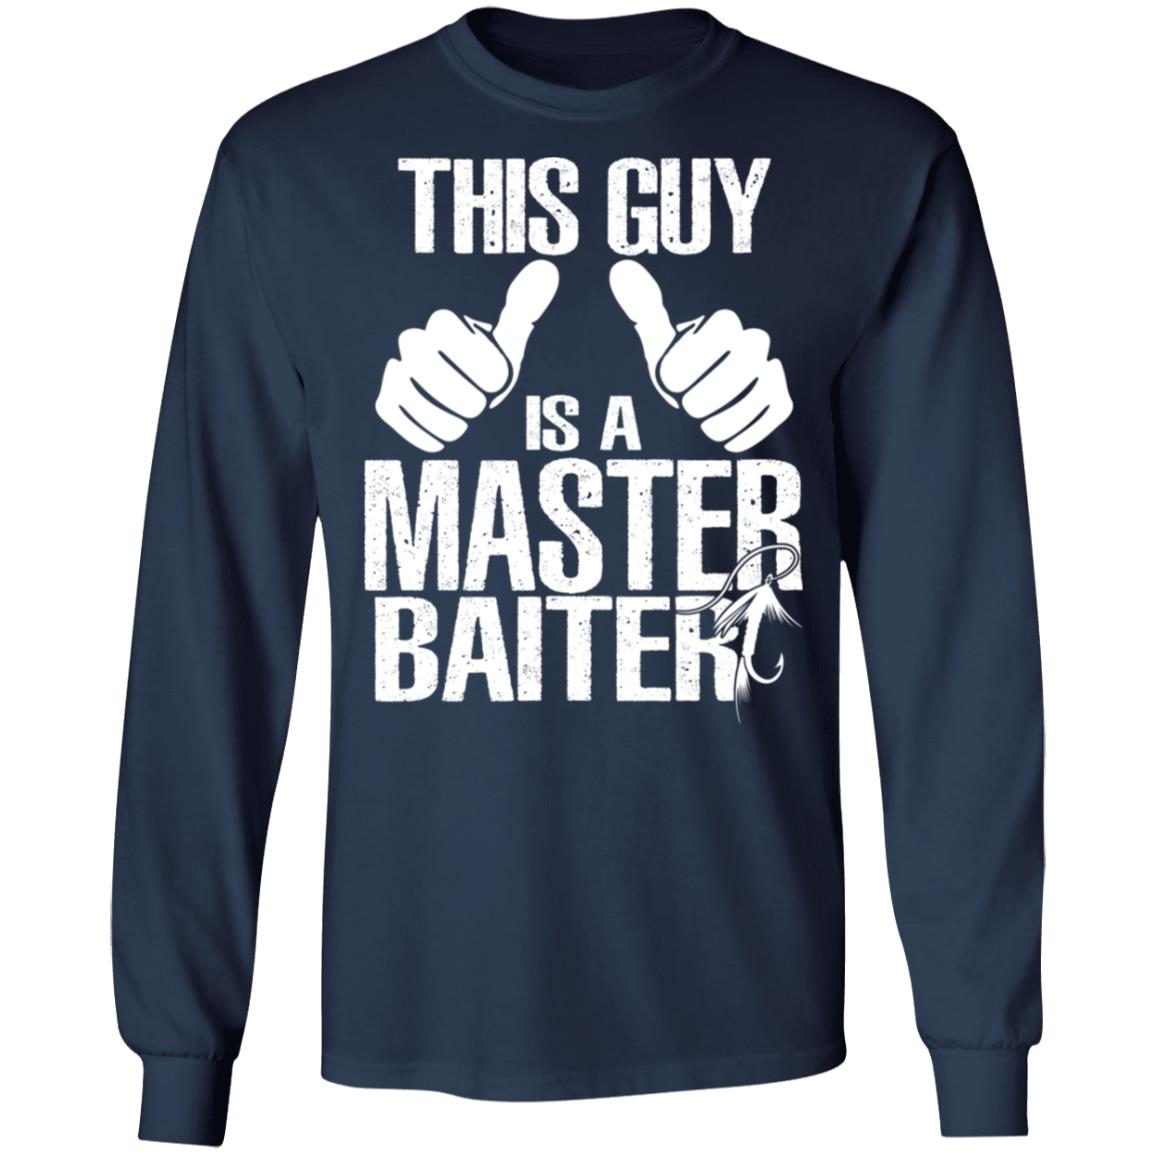 This Guy Is A Master Baiter Shirt